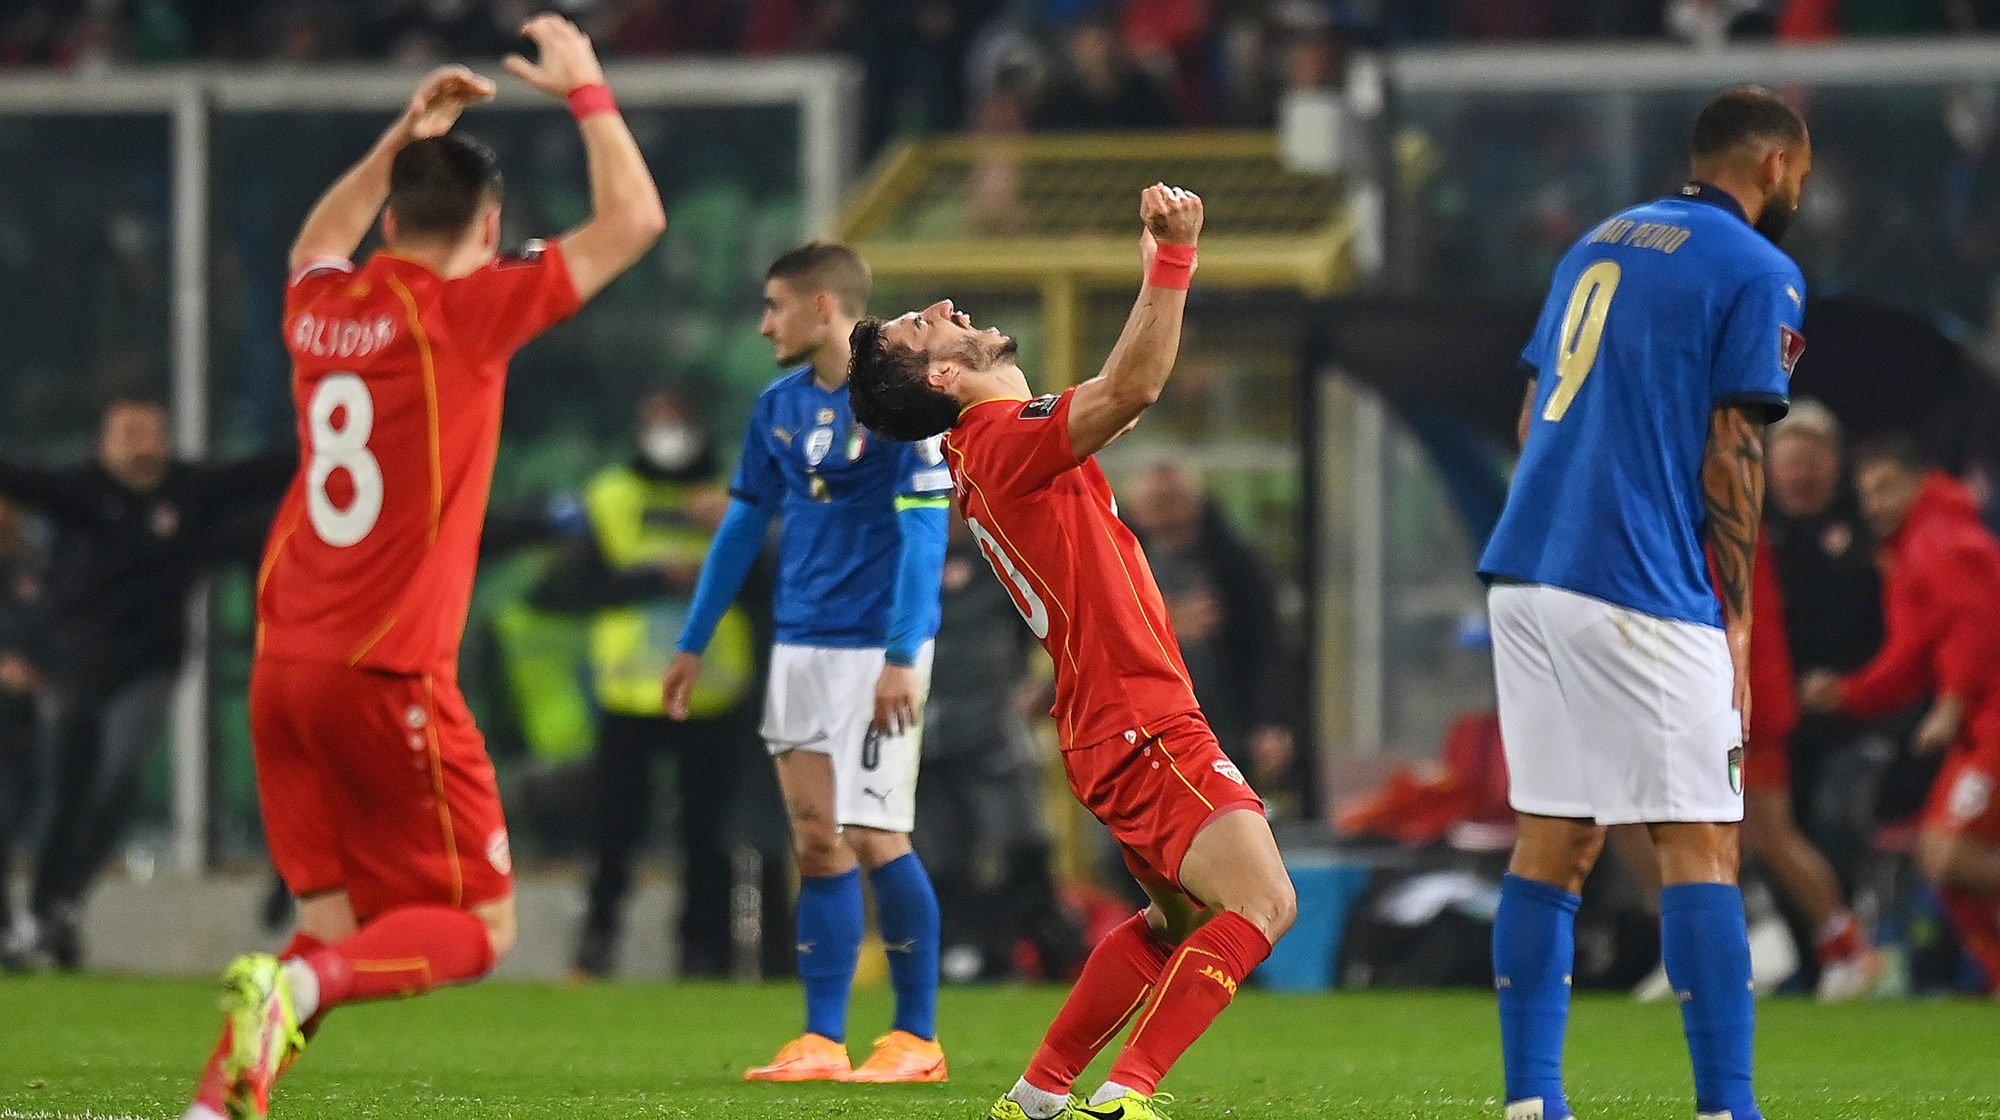 Stefan Spirovski of North Macedonia celebrates their side's victory as Joao Pedro Galvao of Italy looks dejected after the 2022 FIFA World Cup Qualifier knockout round play-off match between Italy and North Macedonia at Stadio Renzo Barbera on March 24, 2022 in Palermo, Italy.